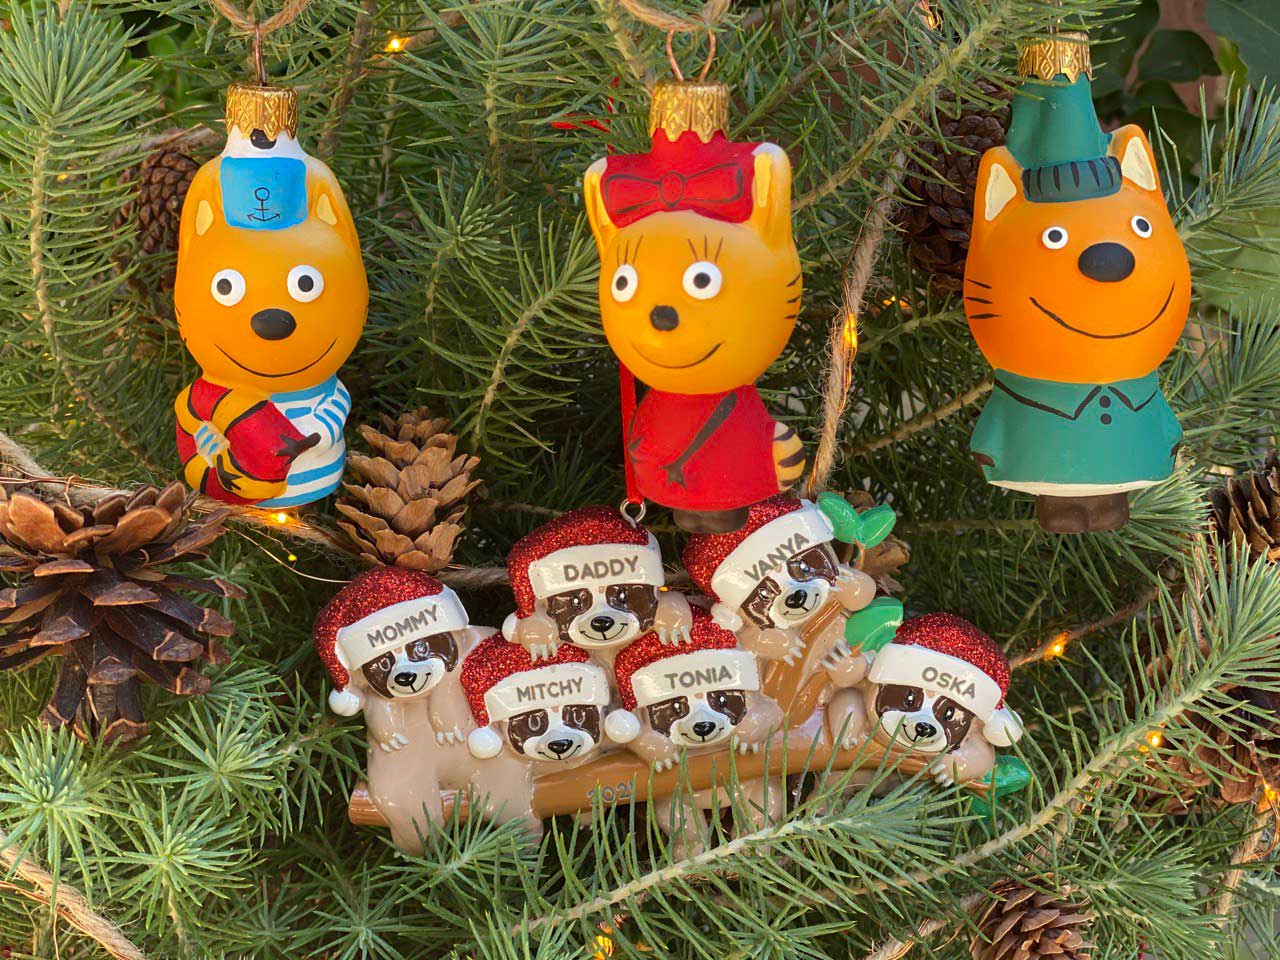 PersonalizationMall Christmas 2021 Ornaments